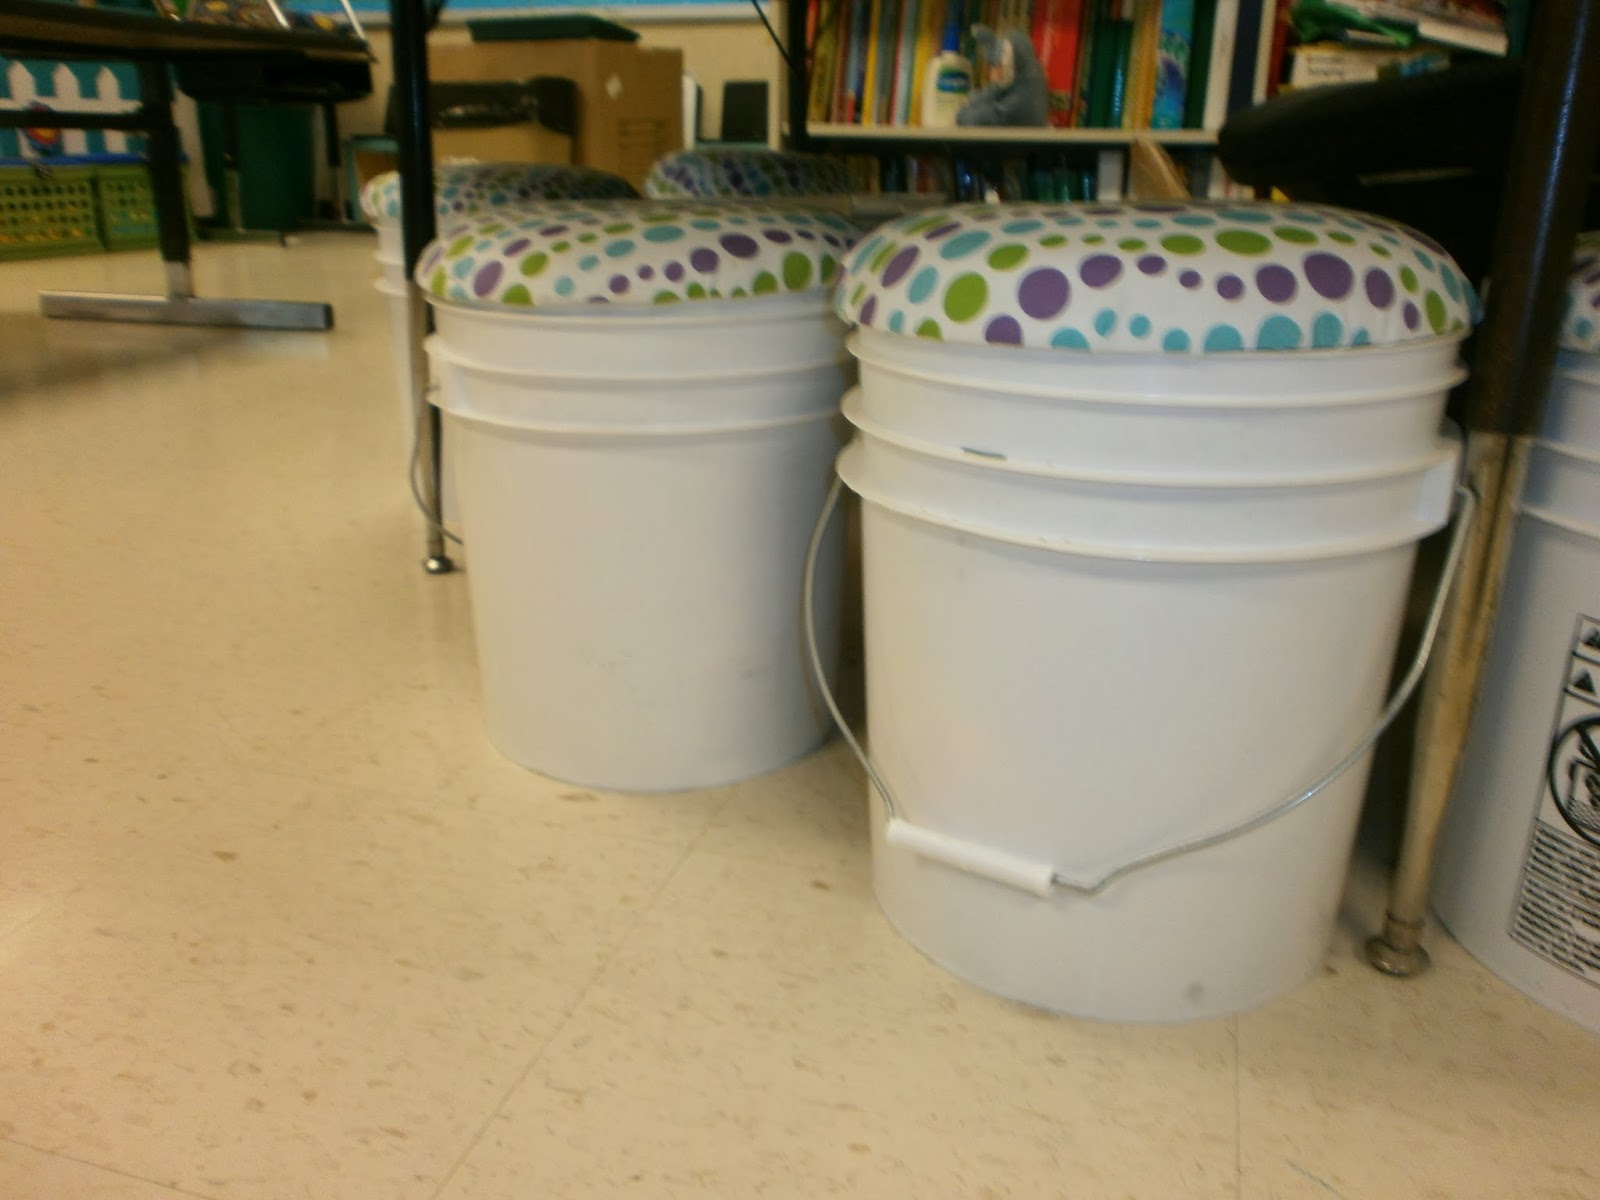 5 Gallon Bucket or Pail Seat Free Shipping